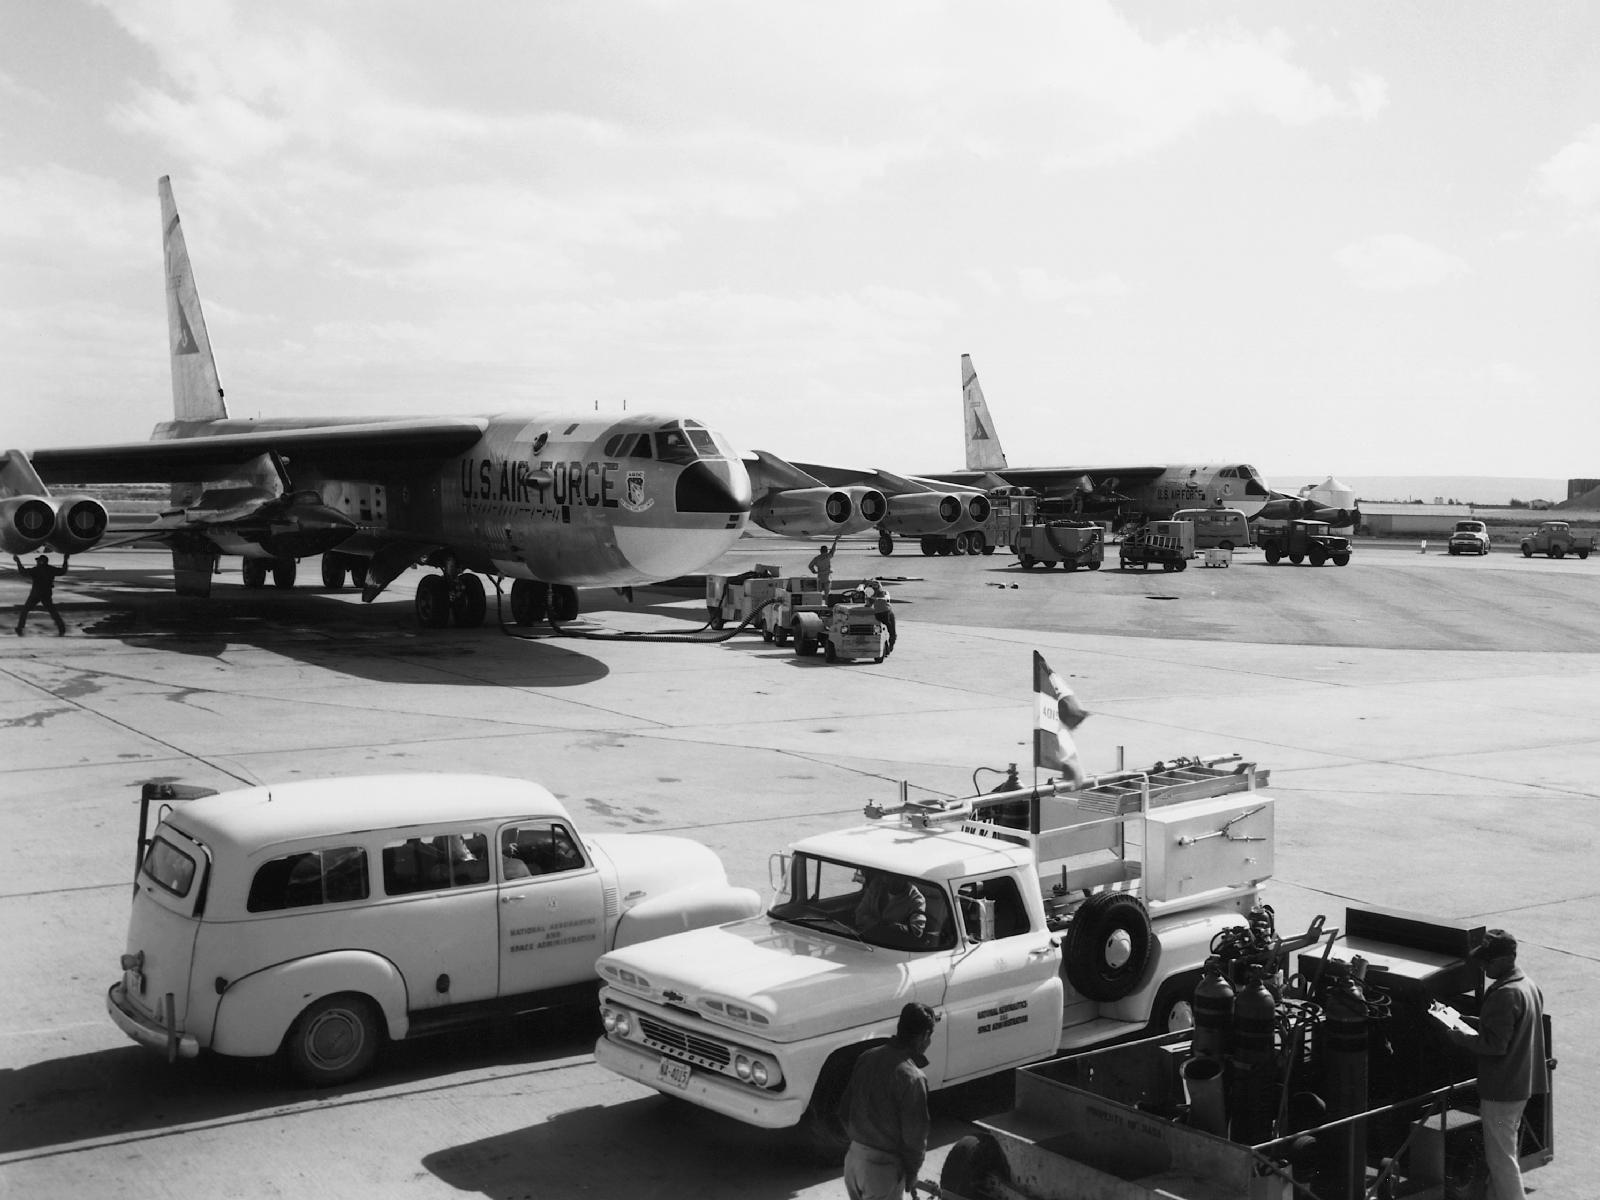 At the left, Boeing NB-52A 52-003 carries X-15 56-6670 while on the right, NB-52B 52-008 carries X-15 56-6671.(NASA)